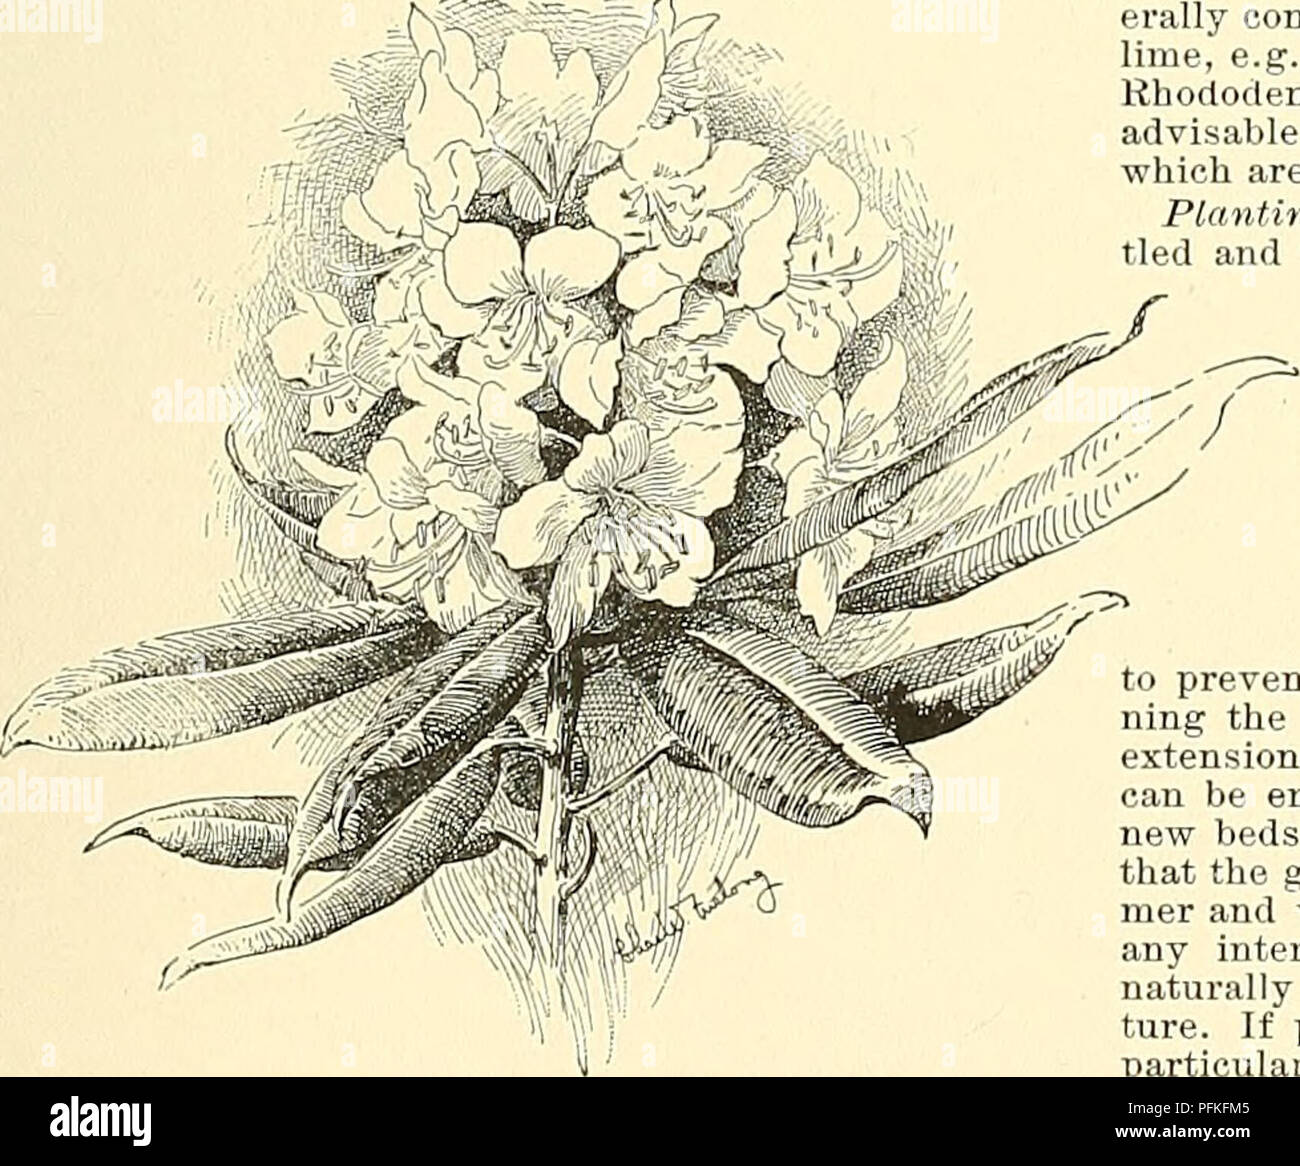 . Cyclopedia of American horticulture, comprising suggestions for cultivation of horticultural plants, descriptions of the species of fruits, vegetables, flowers, and ornamental plants sold in the United States and Canada, together with geographical and biographical sketches. Gardening. 2106. A common hybrid form of Garden Rhododendron. are retentive of moisture; (2) plant in masses, at any rate while young, so that they may protect each other and prevent evaporation; (3) s:ive the bed a northern exposure or a situation where the force of the midday sun is broken; (4) do not plant under or nea Stock Photo